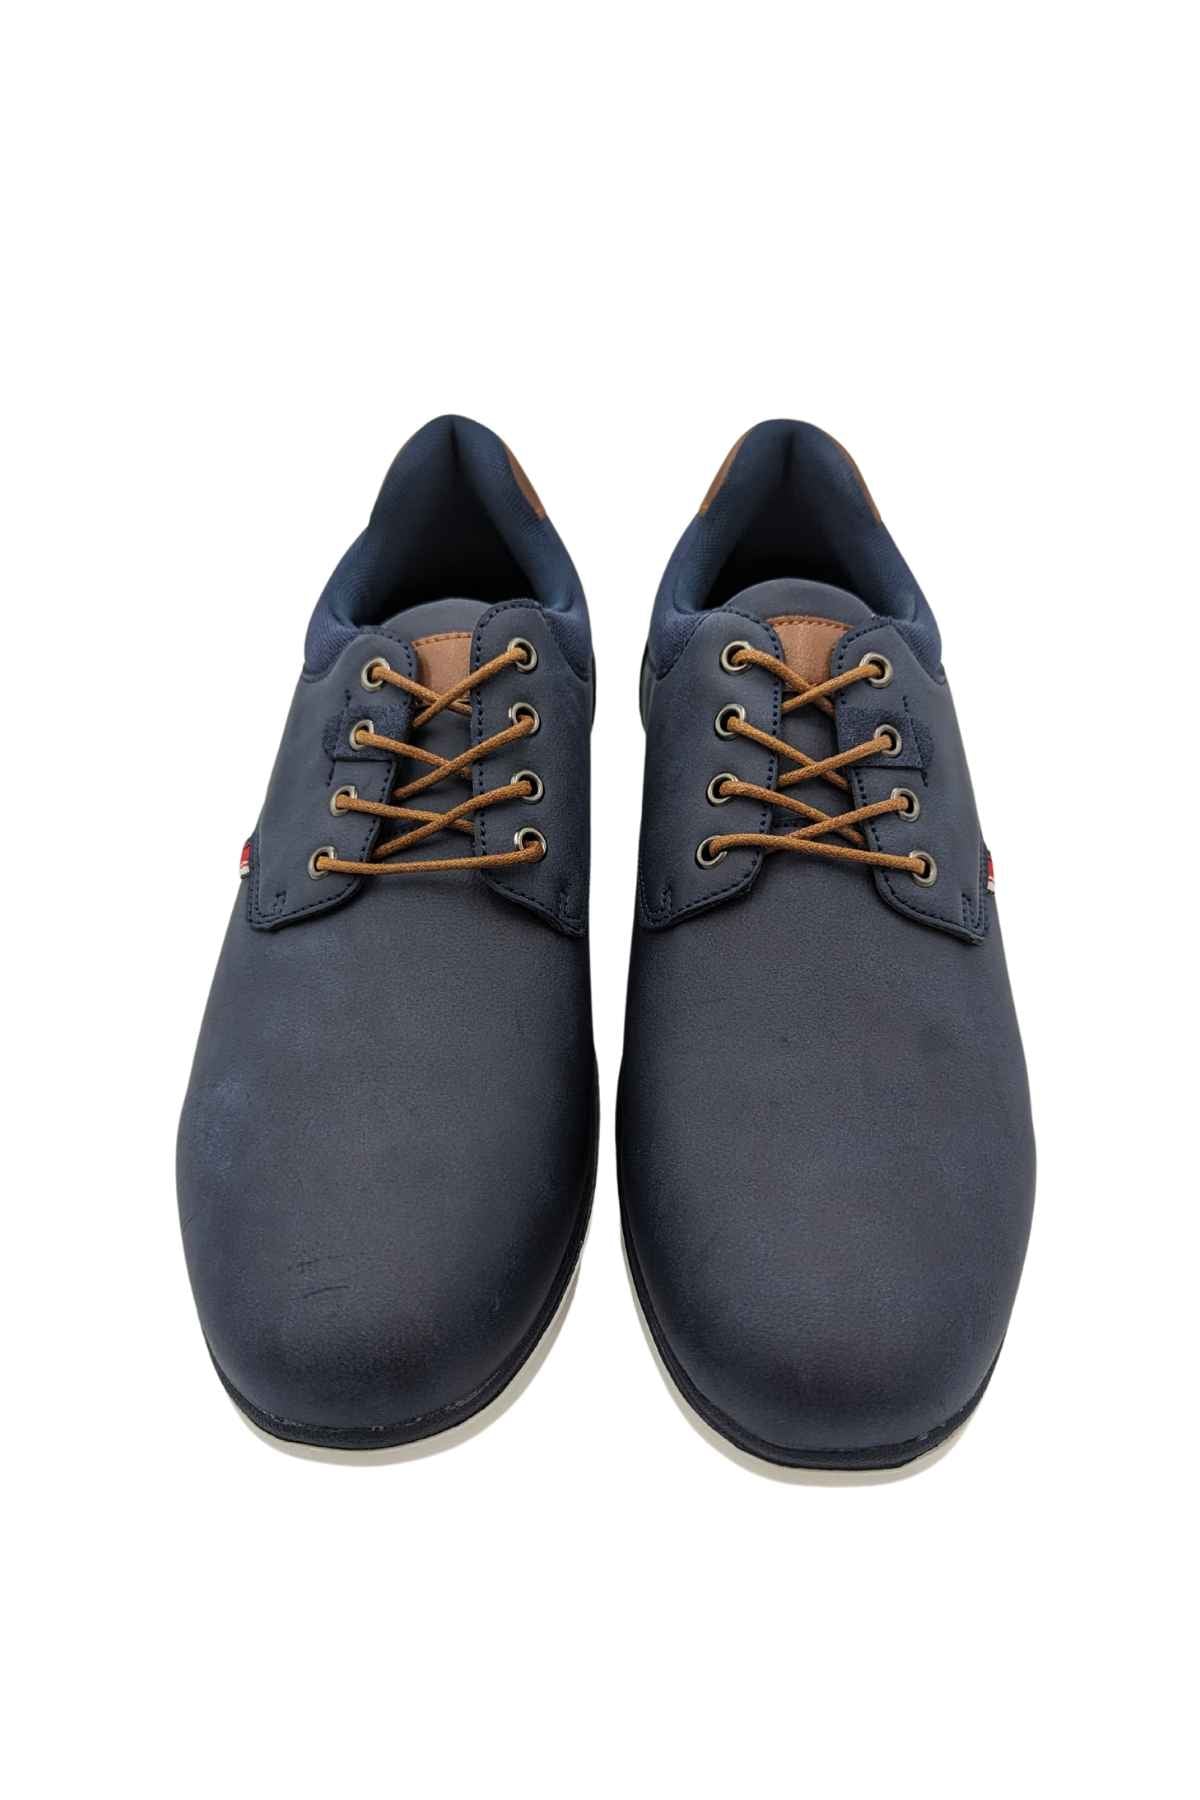 Dolphin Navy Lace Up Shoe-Front view